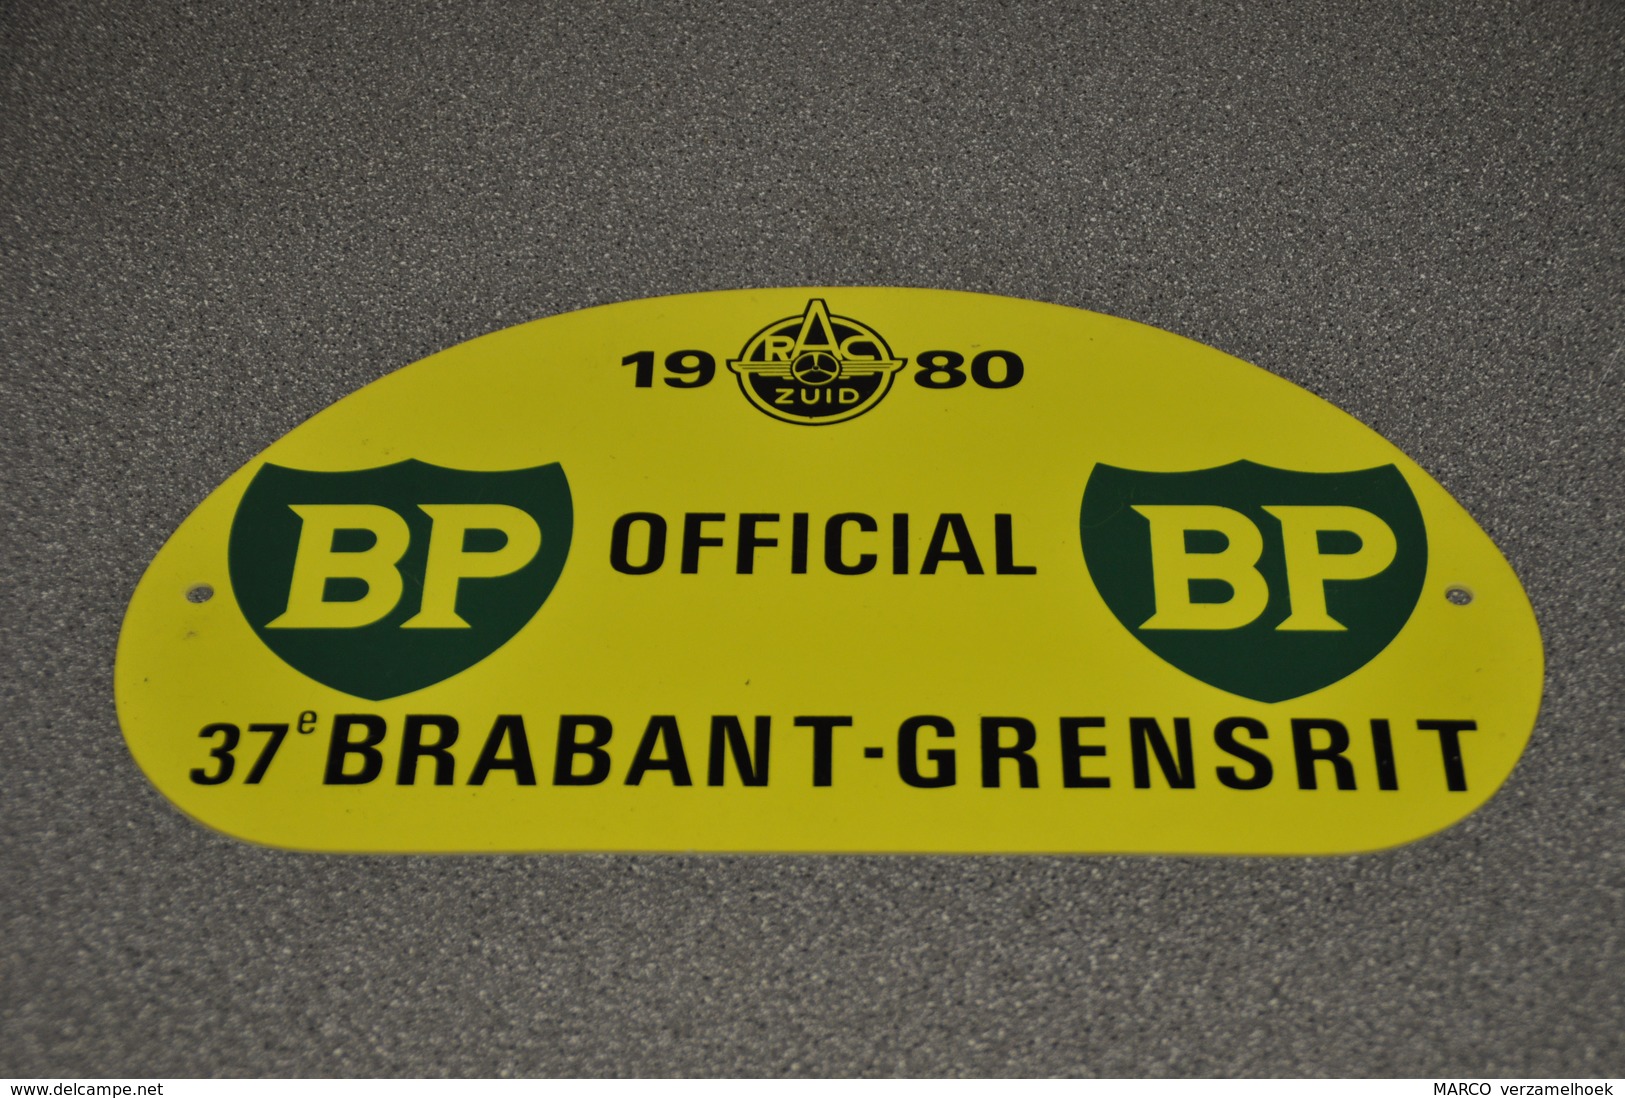 Rally Plaat-rallye Plaque Plastic: 37e Brabant-grensrit OFFICIAL 1980 RAC-zuid BP - Rally-affiches